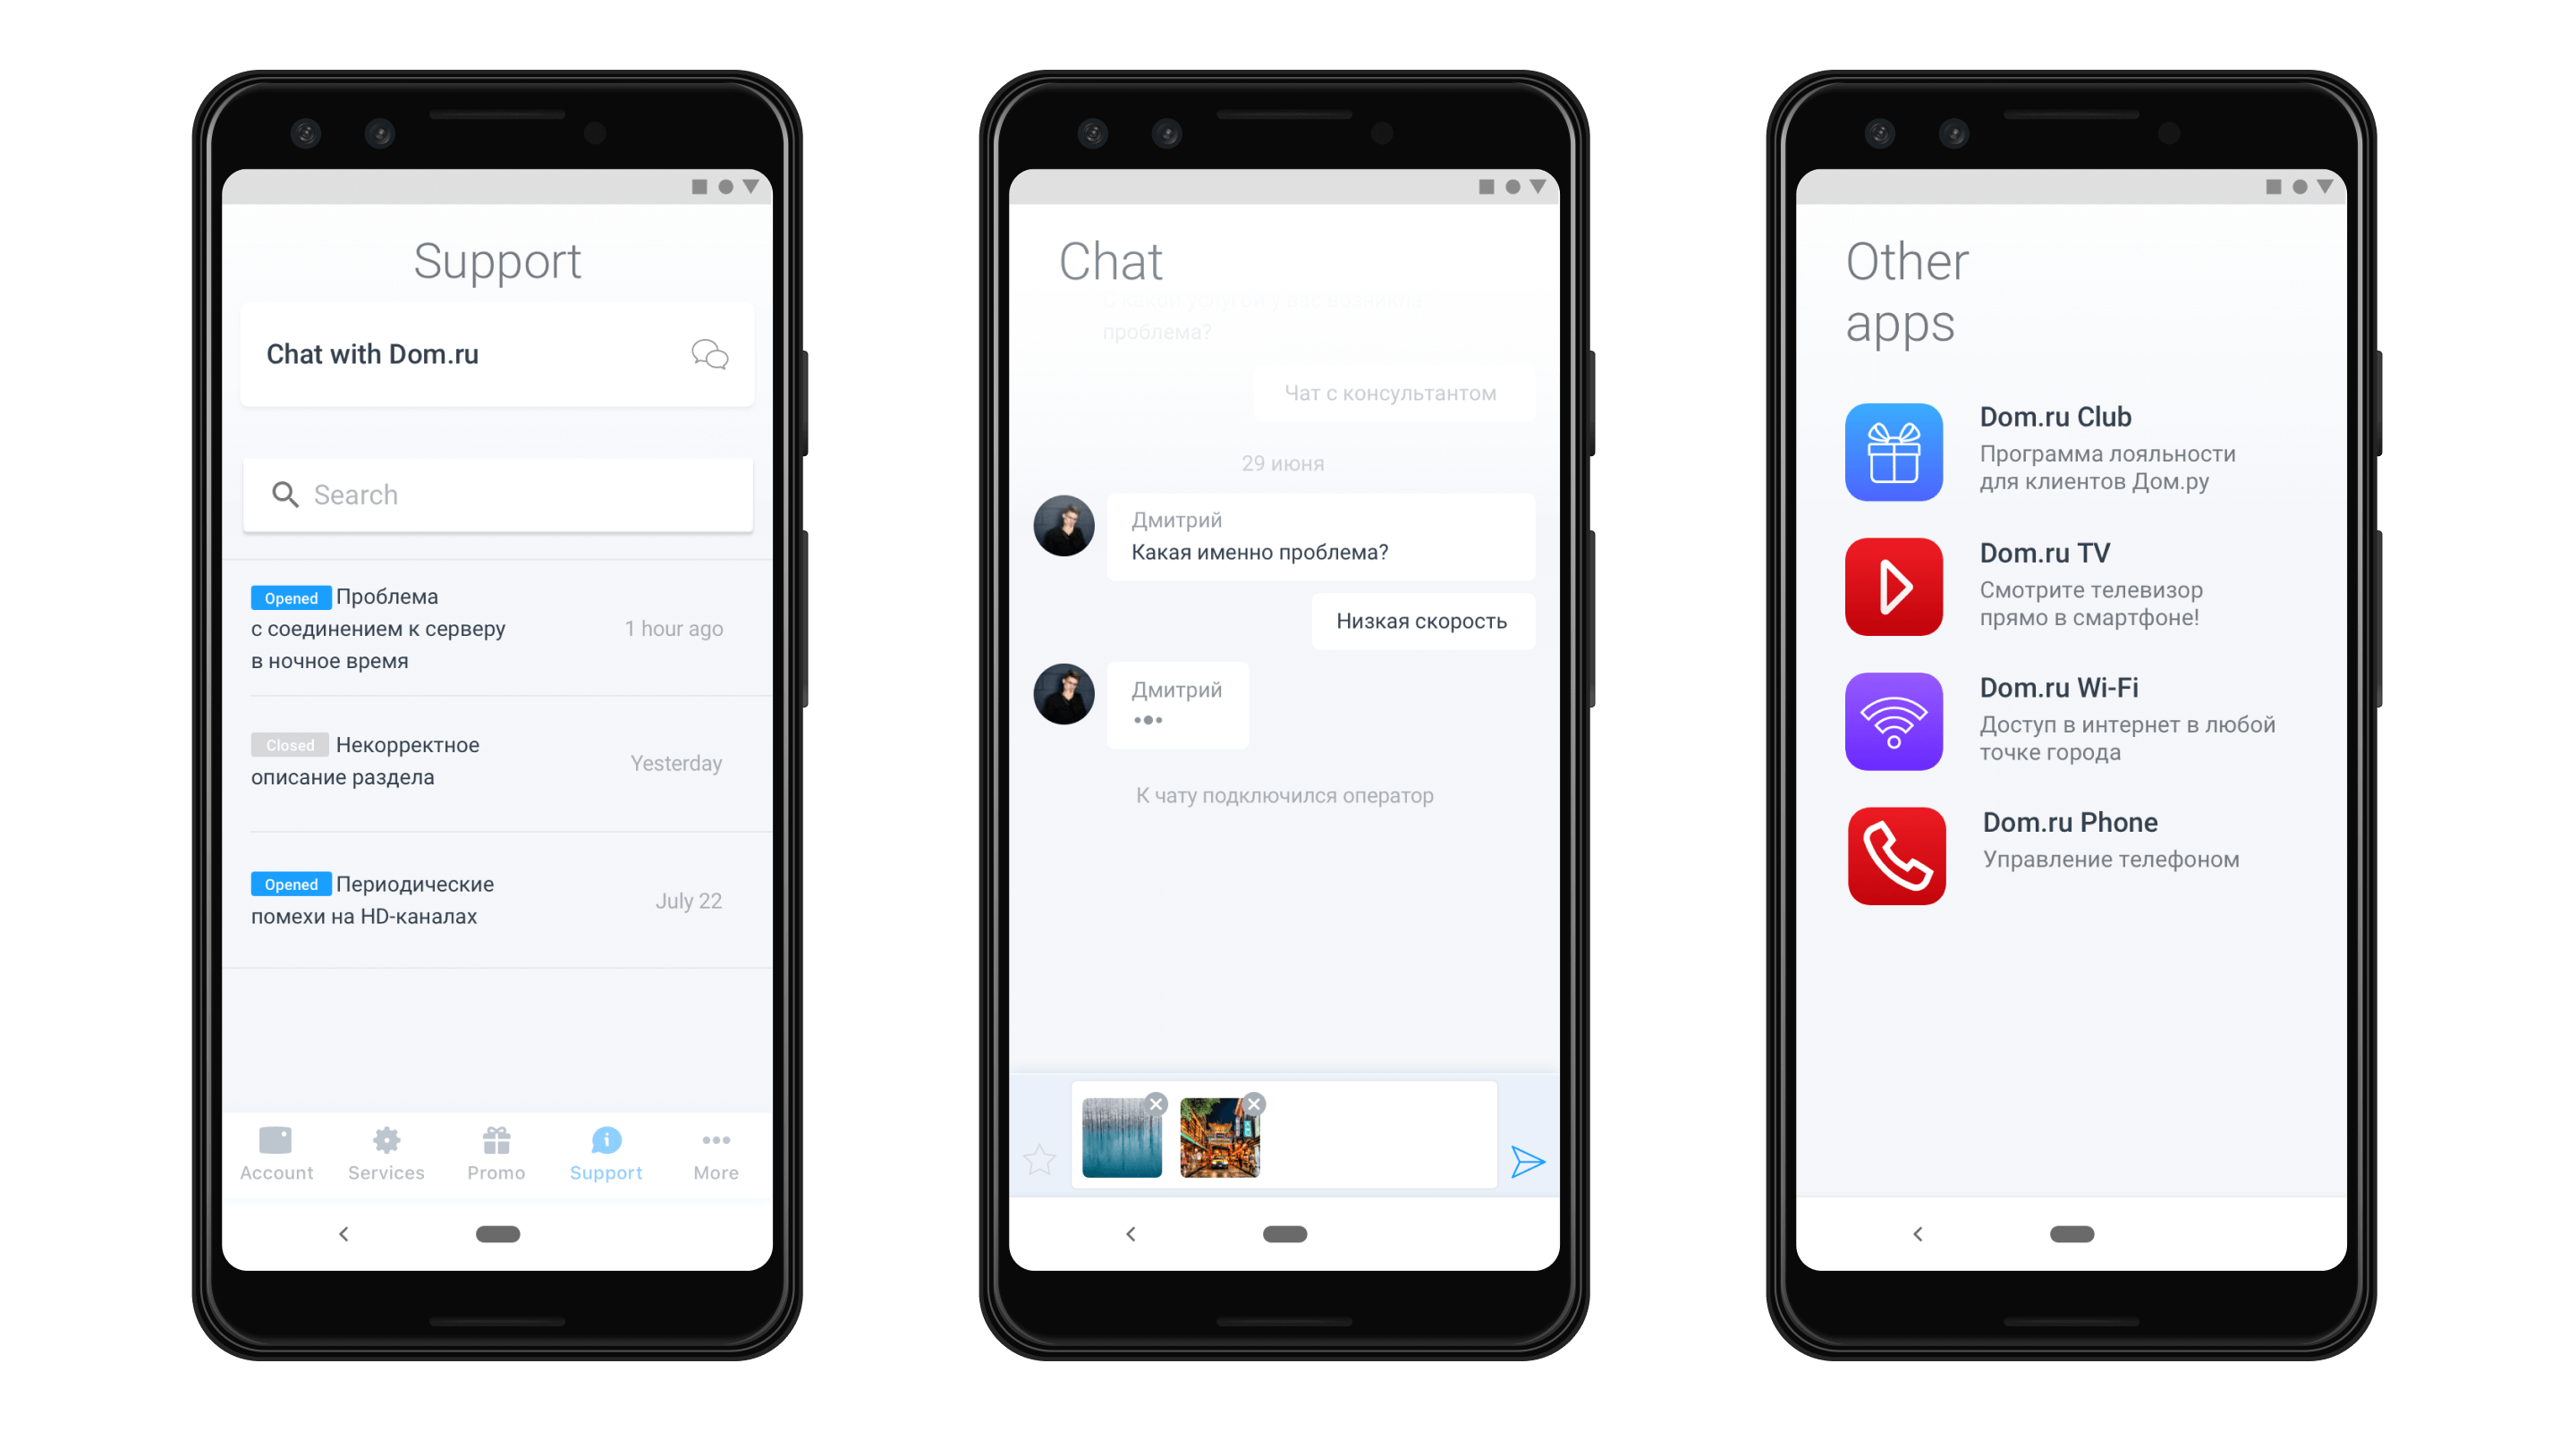 Support, Chat, Other apps